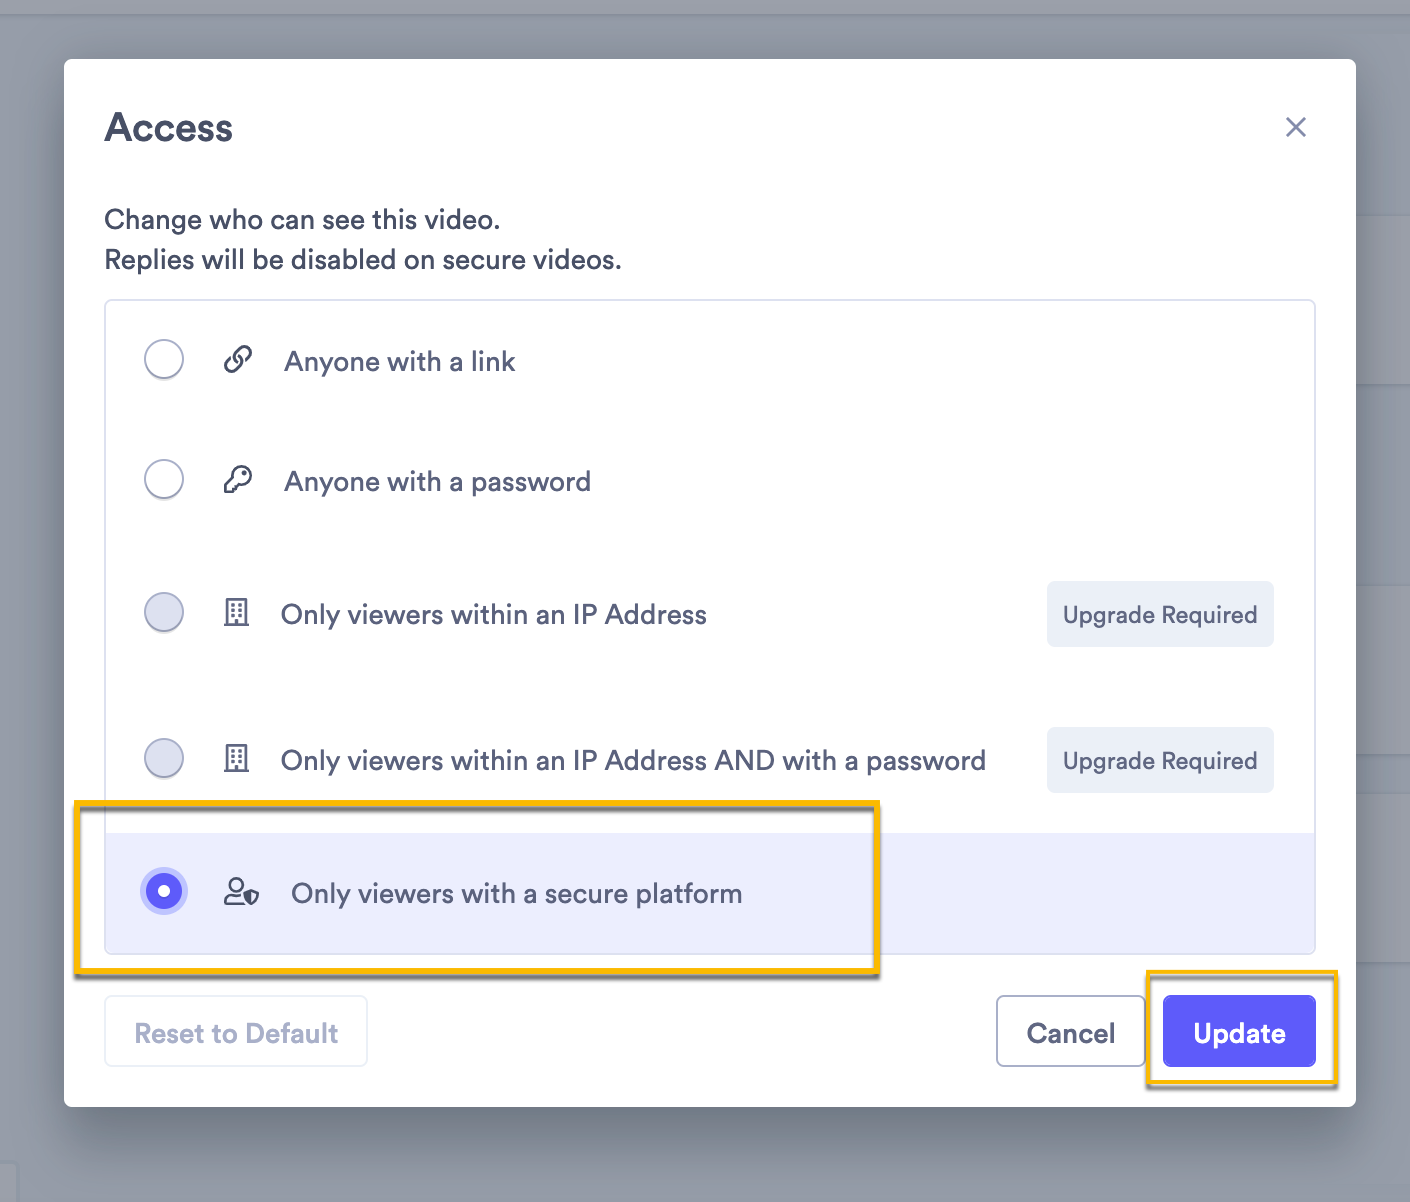 Video access settings set to only allow viewers with a secure platform to play a video